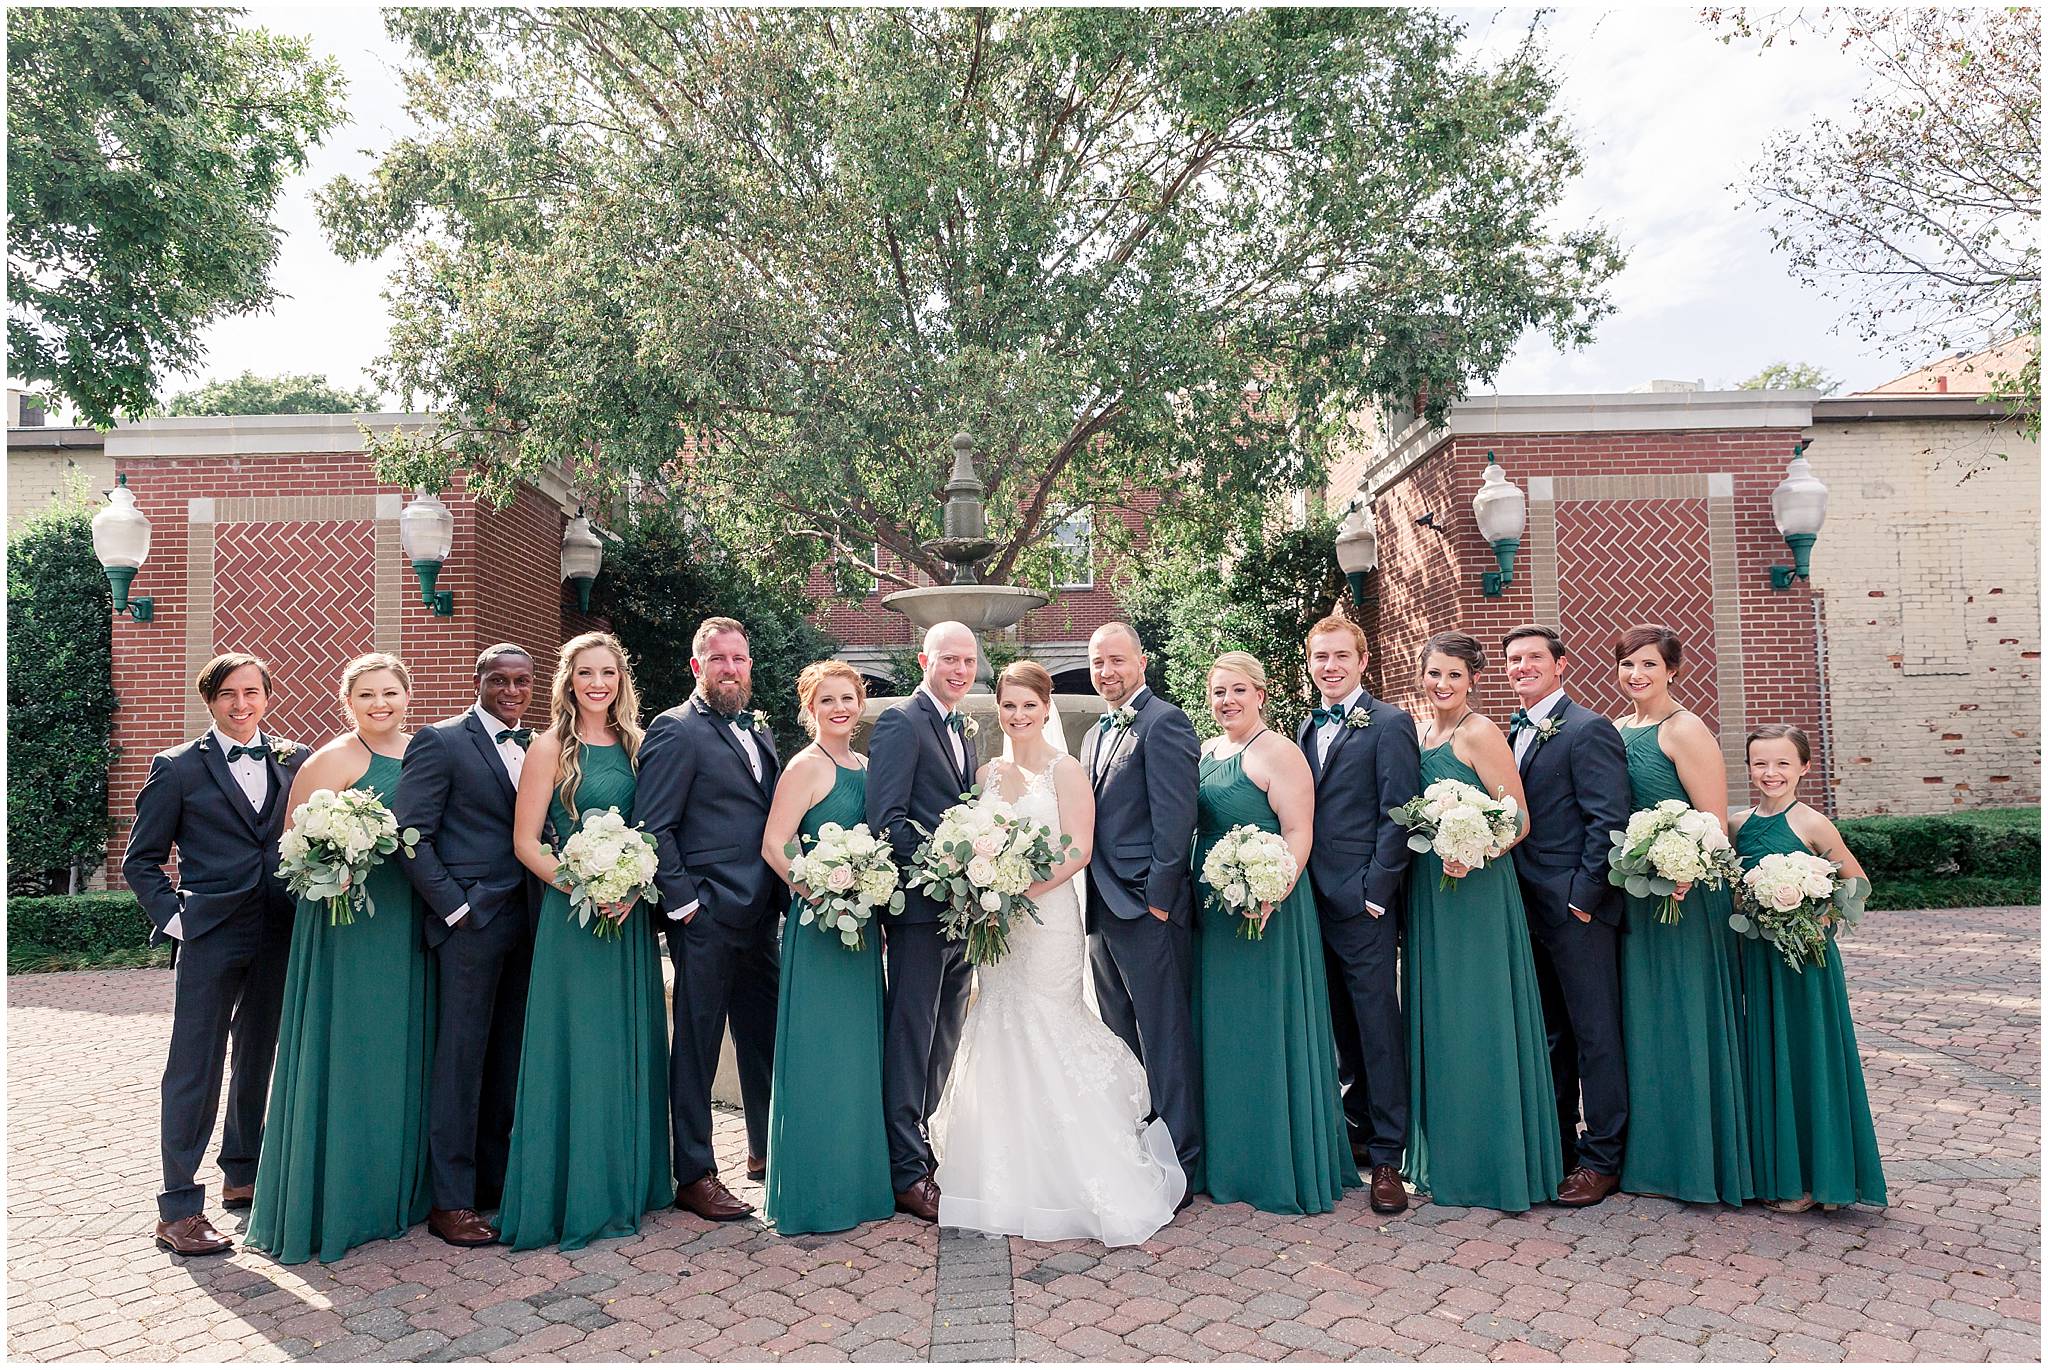 bridal party wedding photography pictures